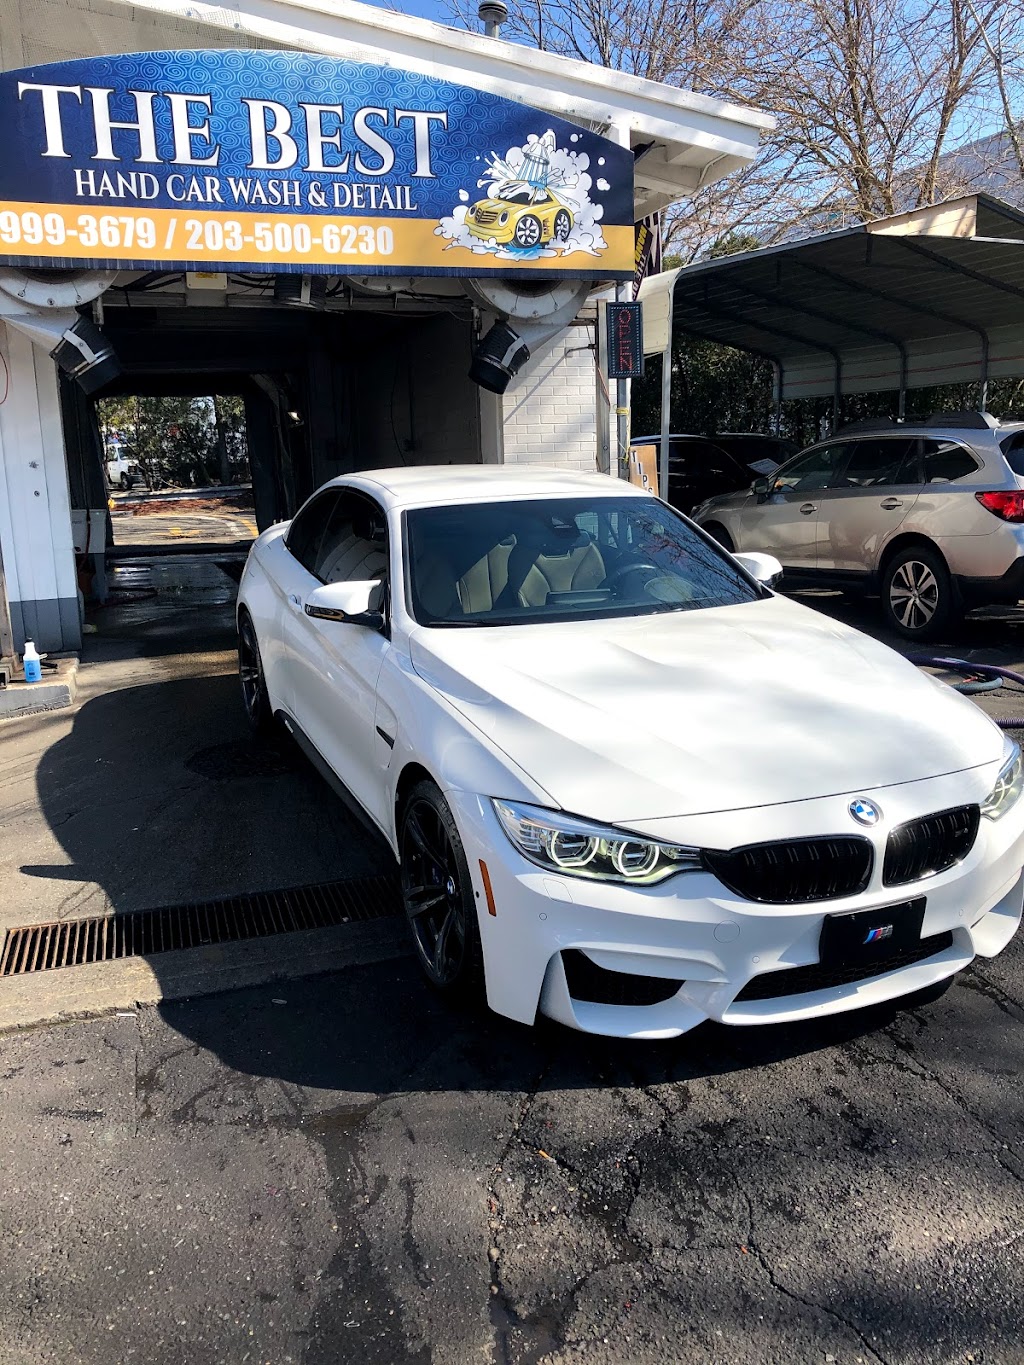 The Best Hand Car Wash & Detail | 524 New Haven Ave, Milford, CT 06460 | Phone: (203) 999-3679